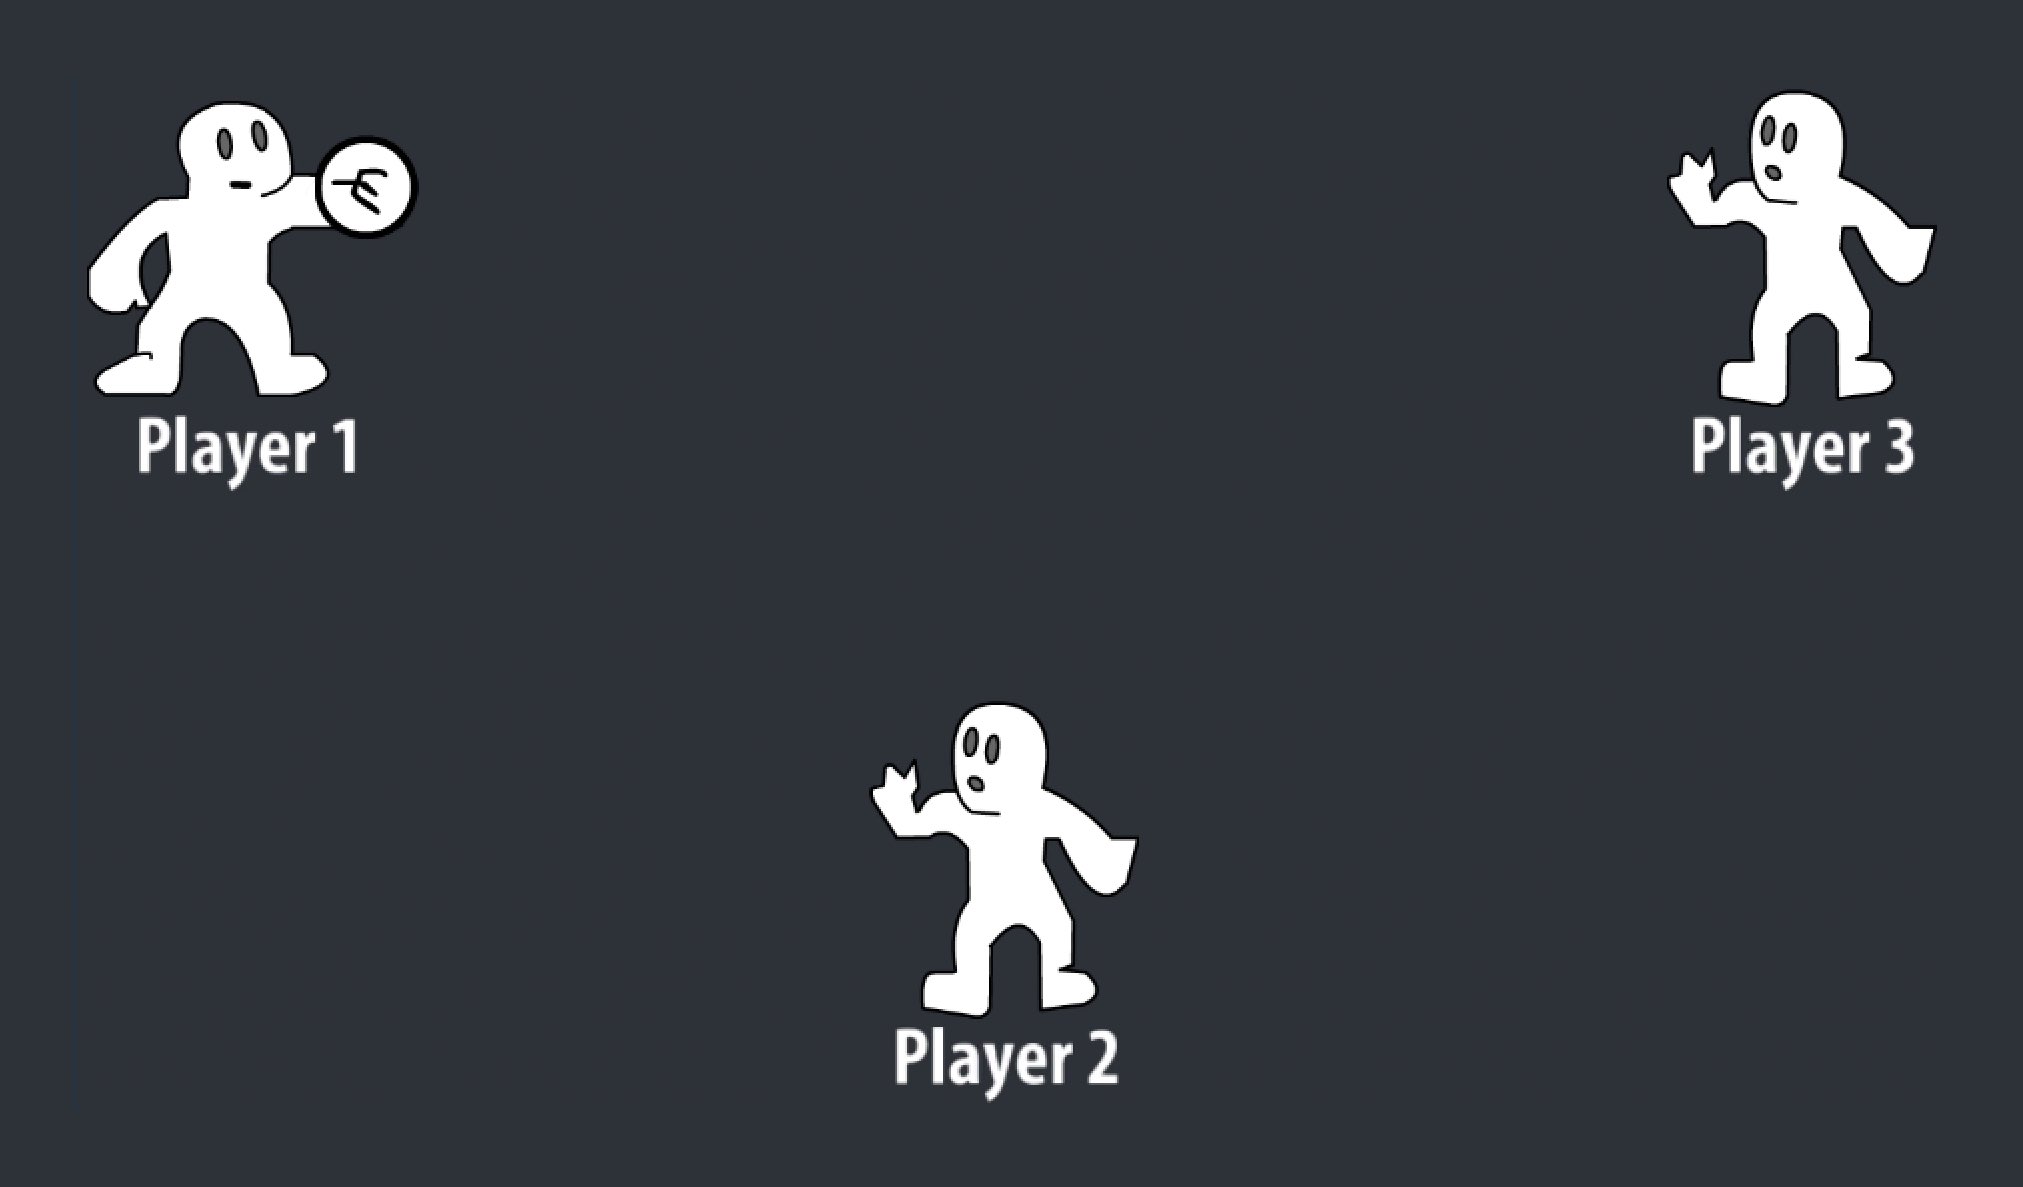 From the cyberball game, three outlined figures playing catch. Player 1 is mid-throw to Player 3.